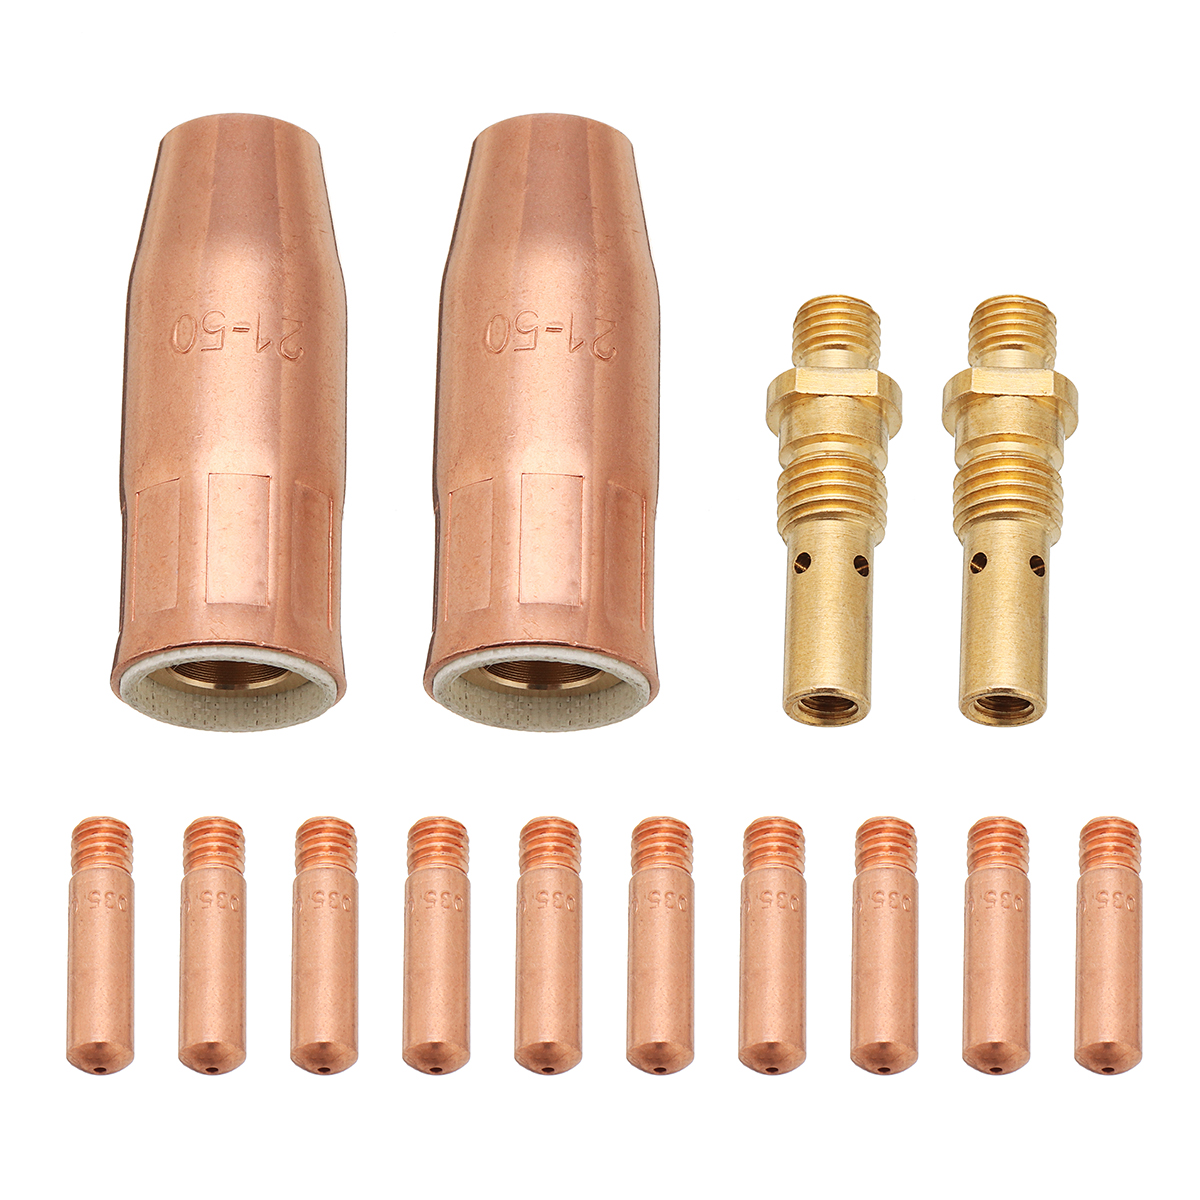 

14Pcs MIG Welding Torch Gun 0.035 Inch Contact Tip Gas Diffuser Gas Nozzle for Lincoln 100L Tweco